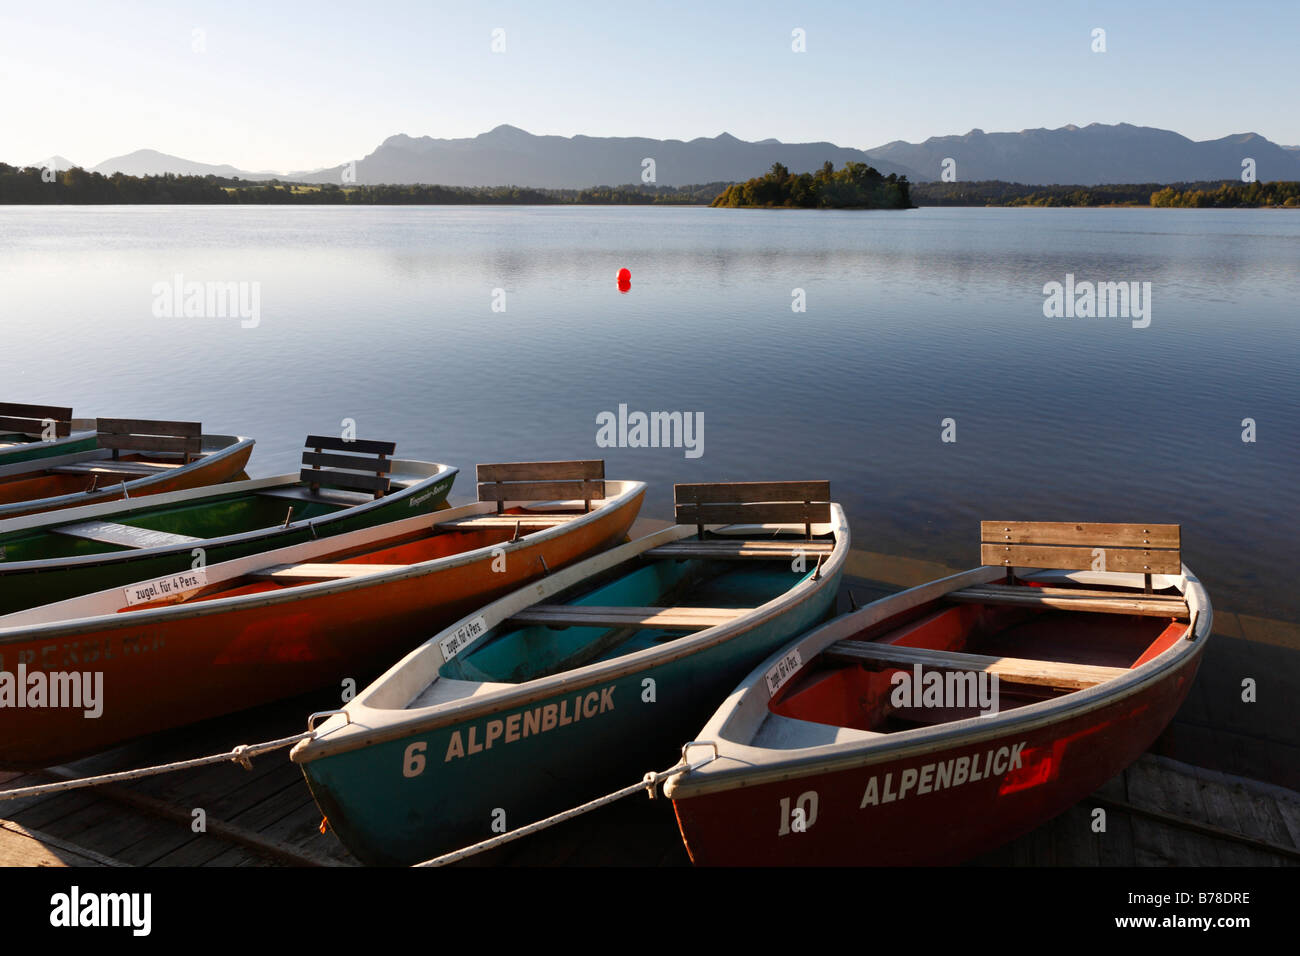 Ruderboote High Resolution Stock Photography and Images - Alamy